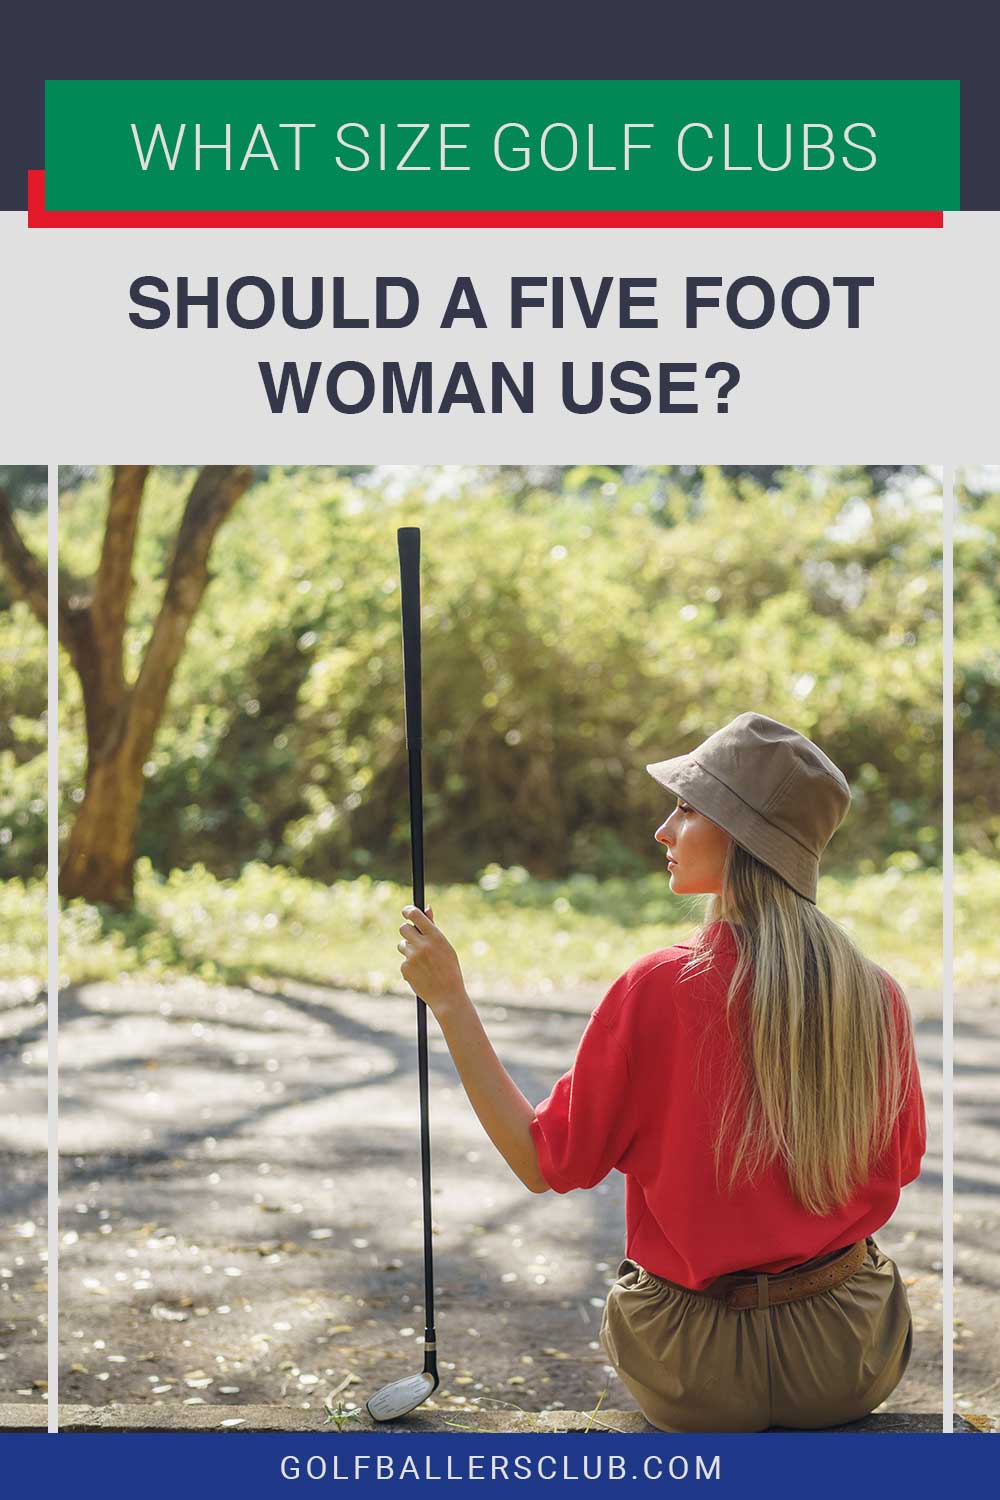 Woman in red shirt sitting with a golf club in hand - What Size Golf Clubs Should A Five Foot Woman Use?